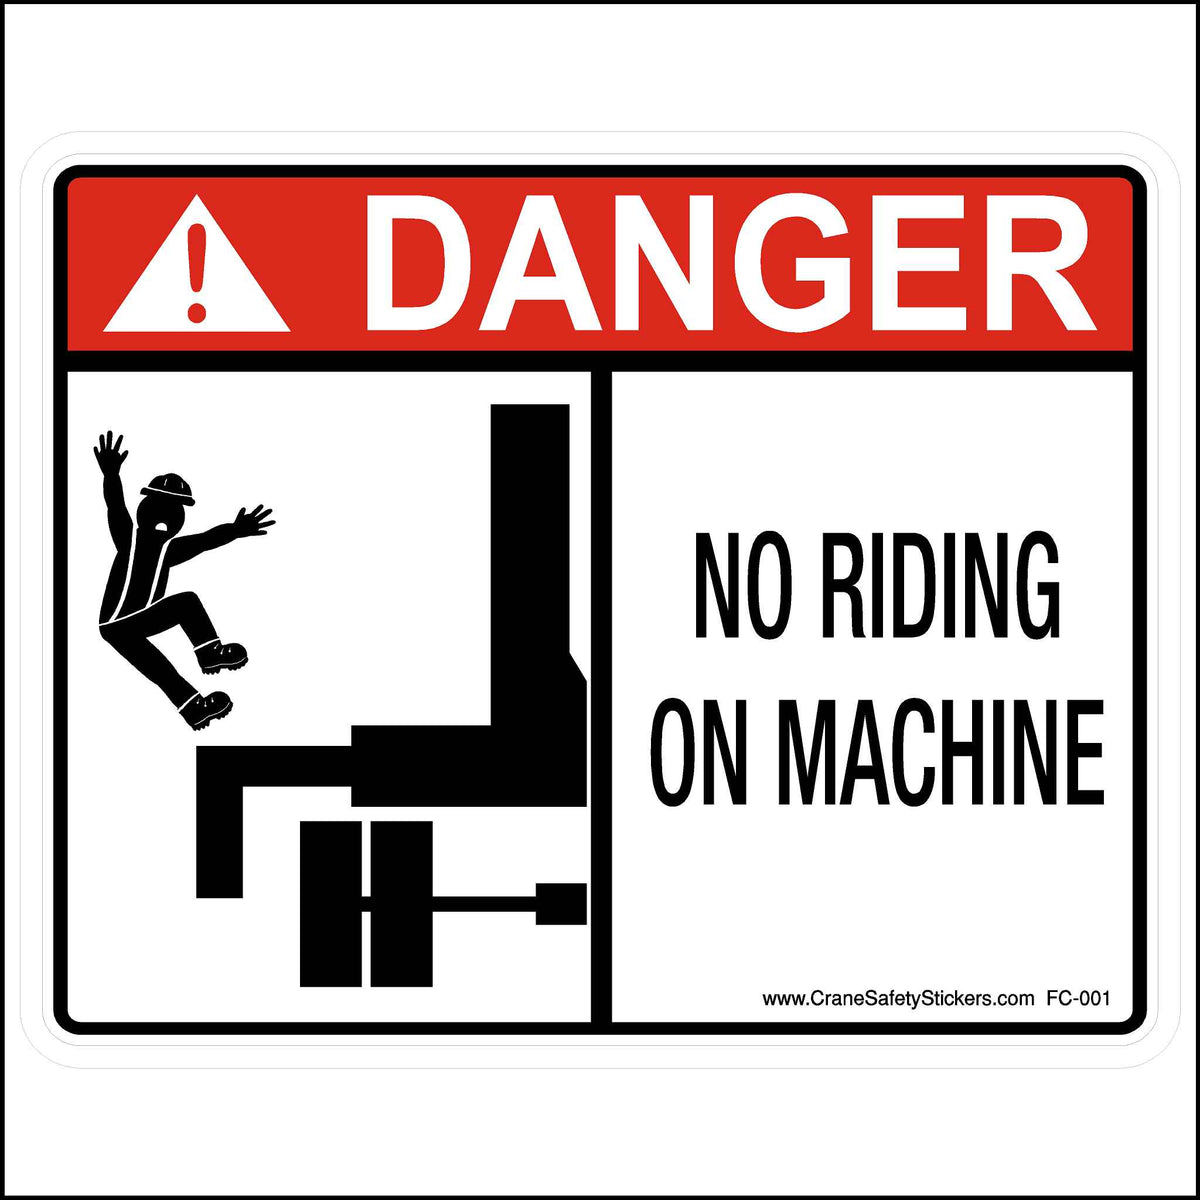 No Riding On Machine Safety Decal For Your Crane and Boom Truck.